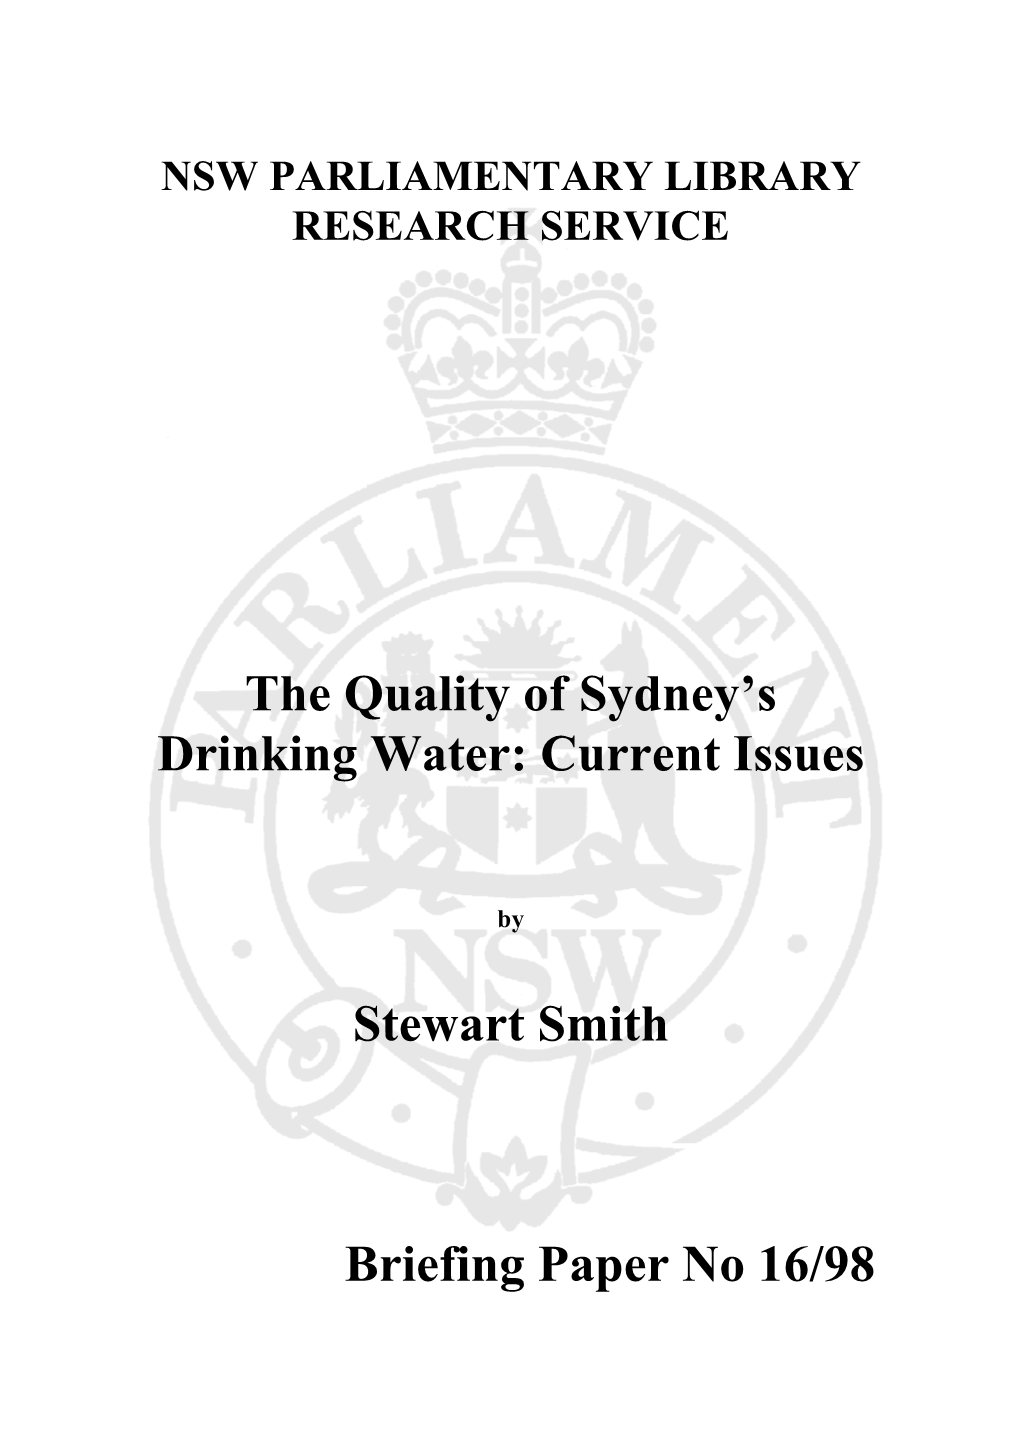 The Quality of Sydney's Drinking Water